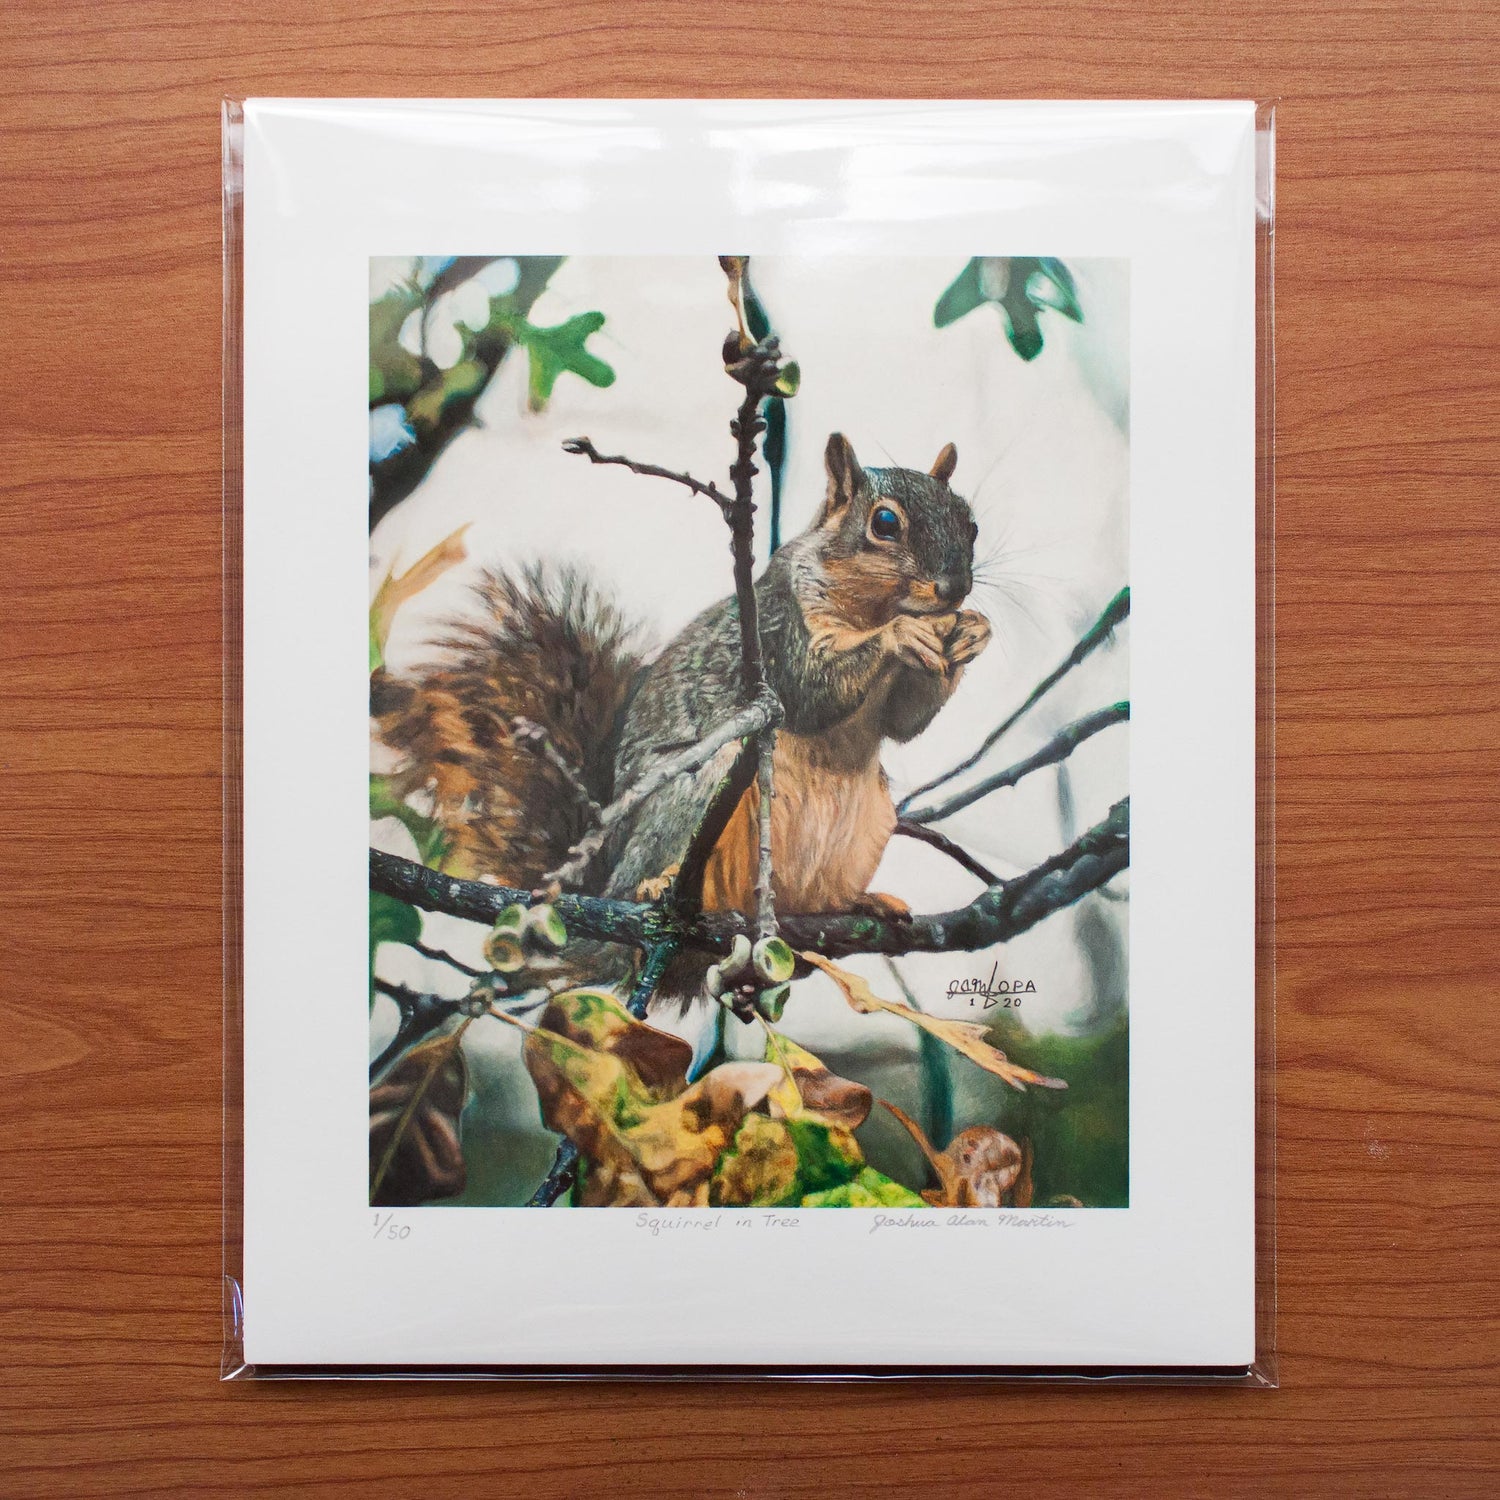 Signed fine art print by artist Joshua Martin of Squirrel in Tree.